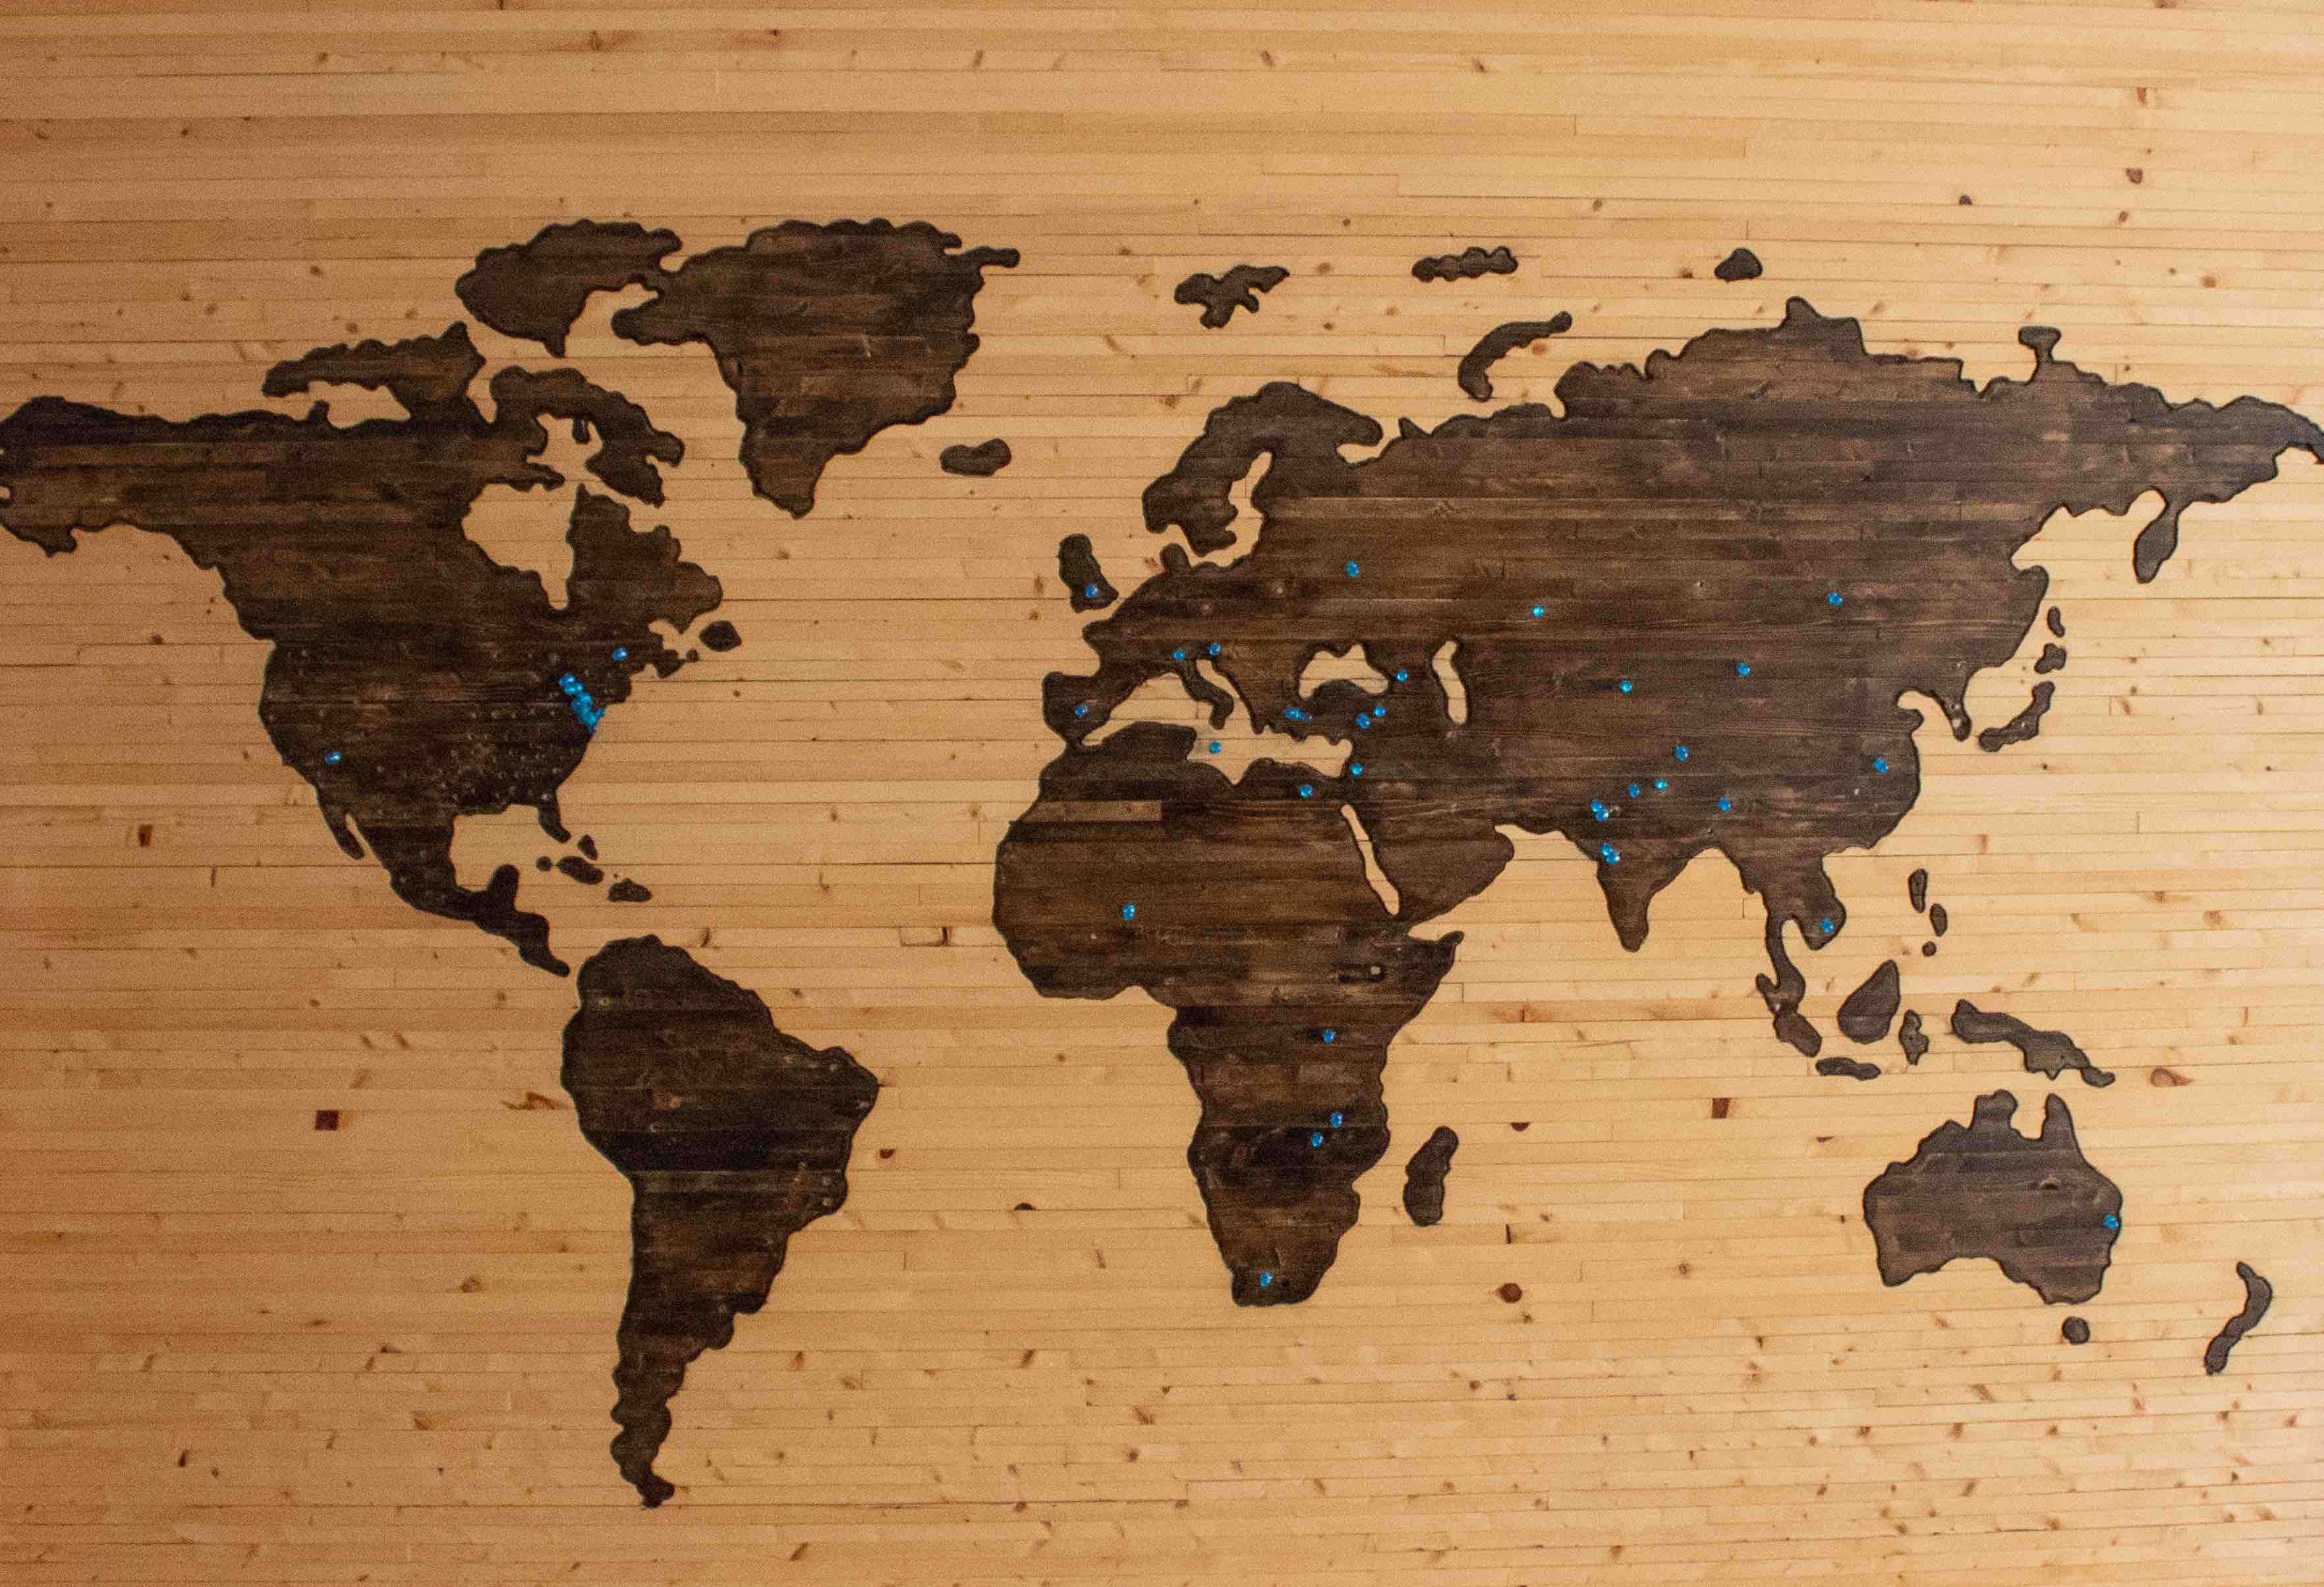 World map made of wood with blue flags to mark places